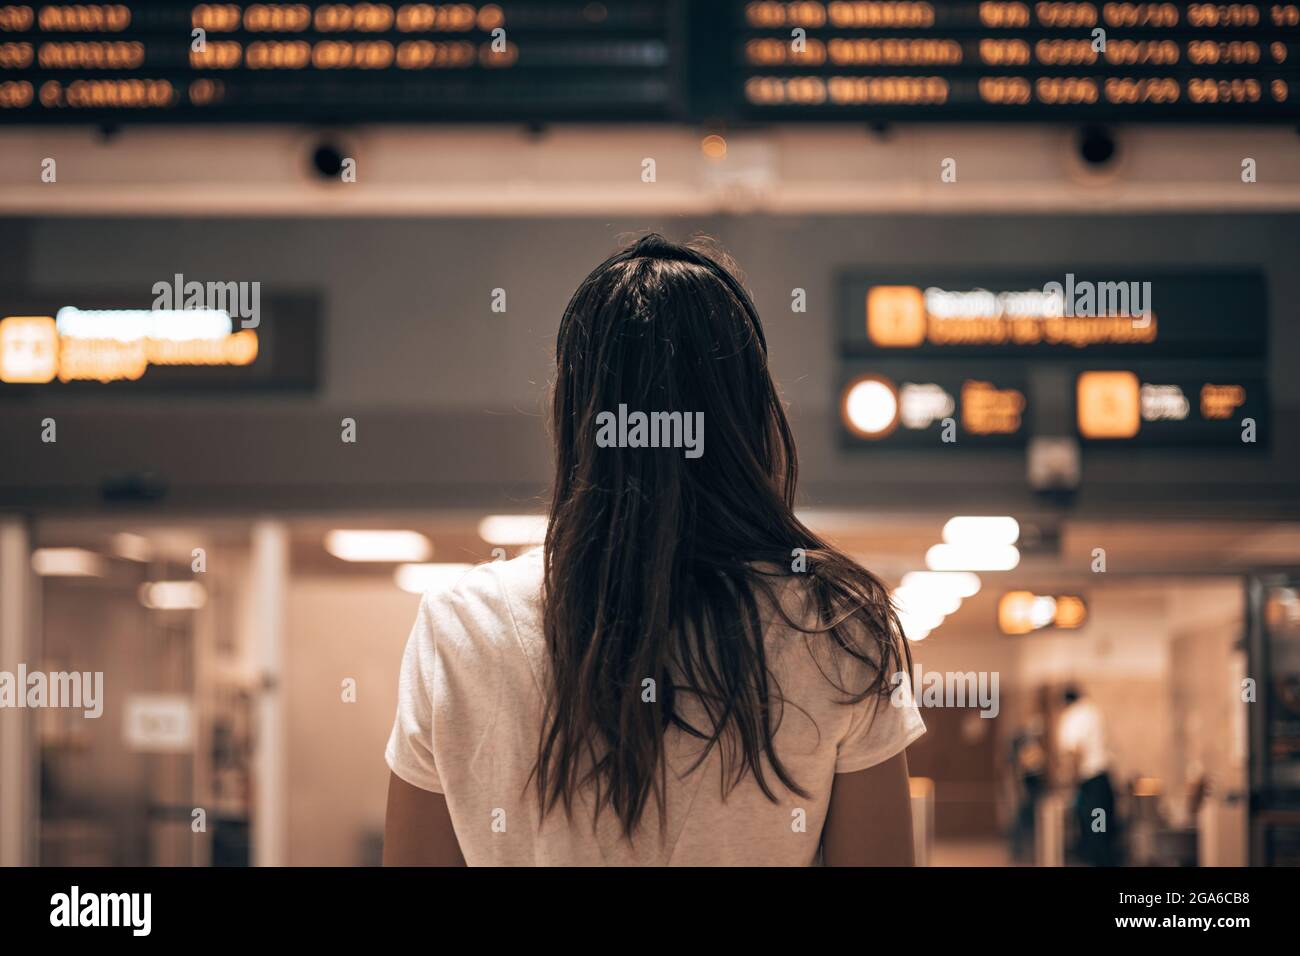 Woman in an airport terminal looking at the large screens showing the departures and arrivals of the planes, waiting for the details of her flight Stock Photo